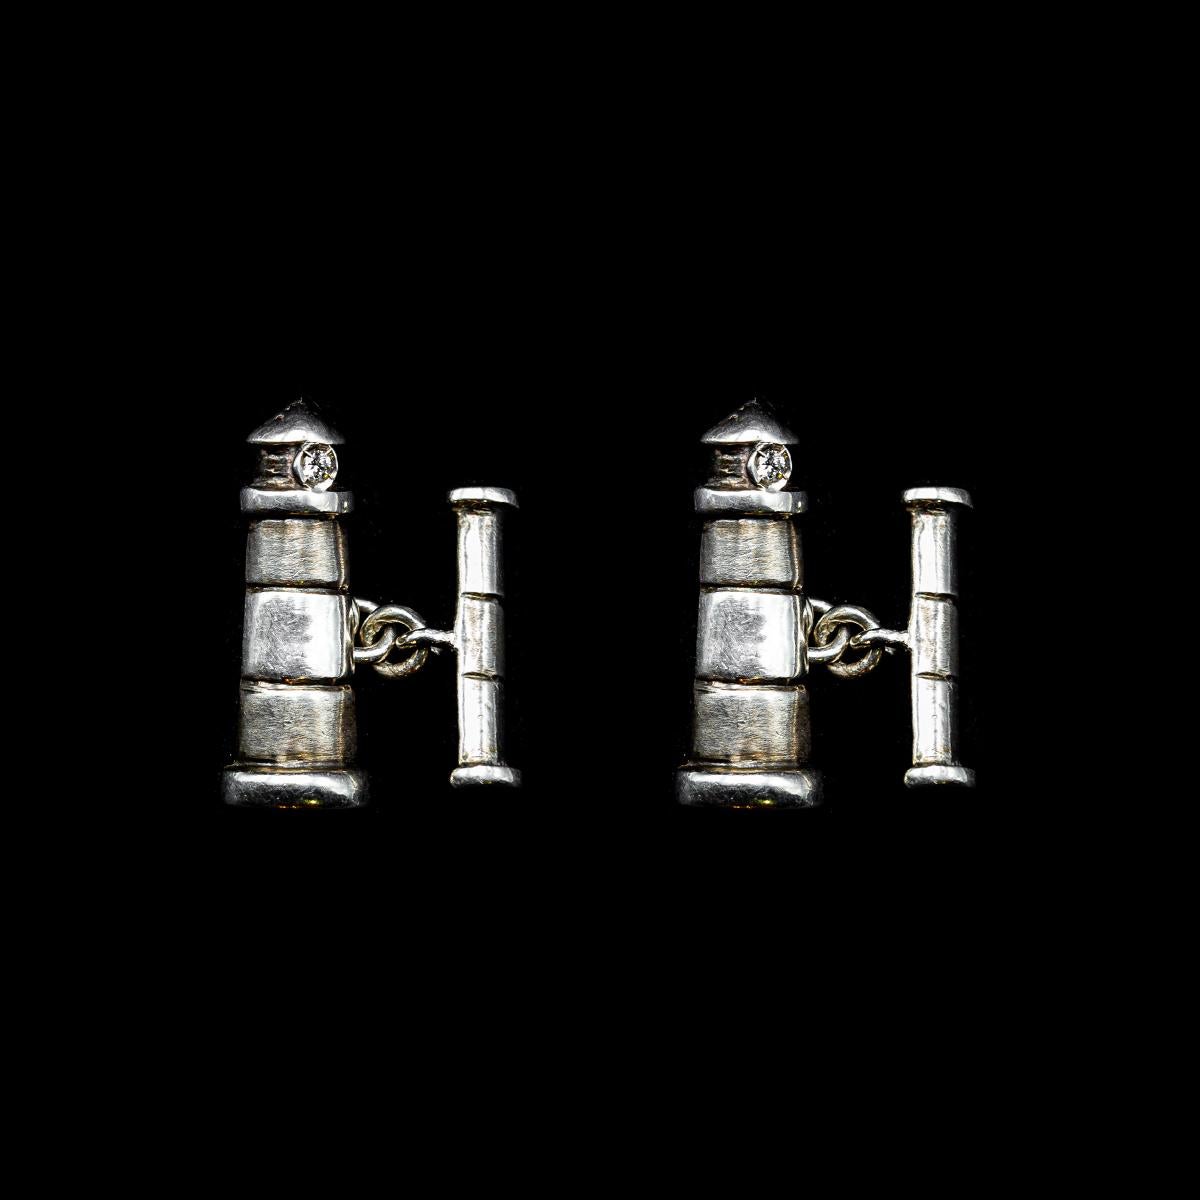 Handmade 925 silver lighthouse shaped cufflinks with 0,04 ct small diamonds.
The first evidence of the use of cufflinks dates back to the Renaissance period. Over time, shirt cufflinks have become a real status symbol, a precious and elegant